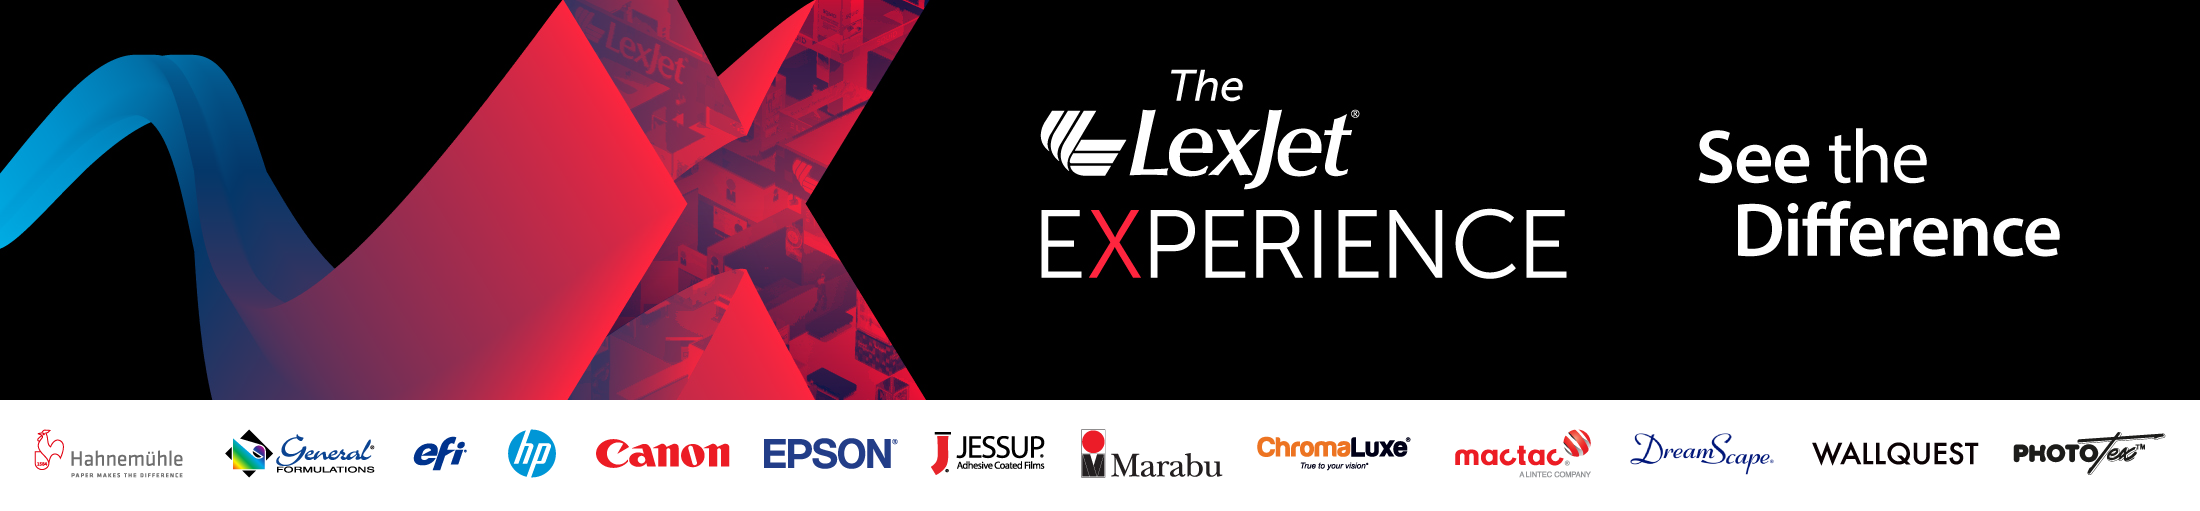 The LexJet Experience